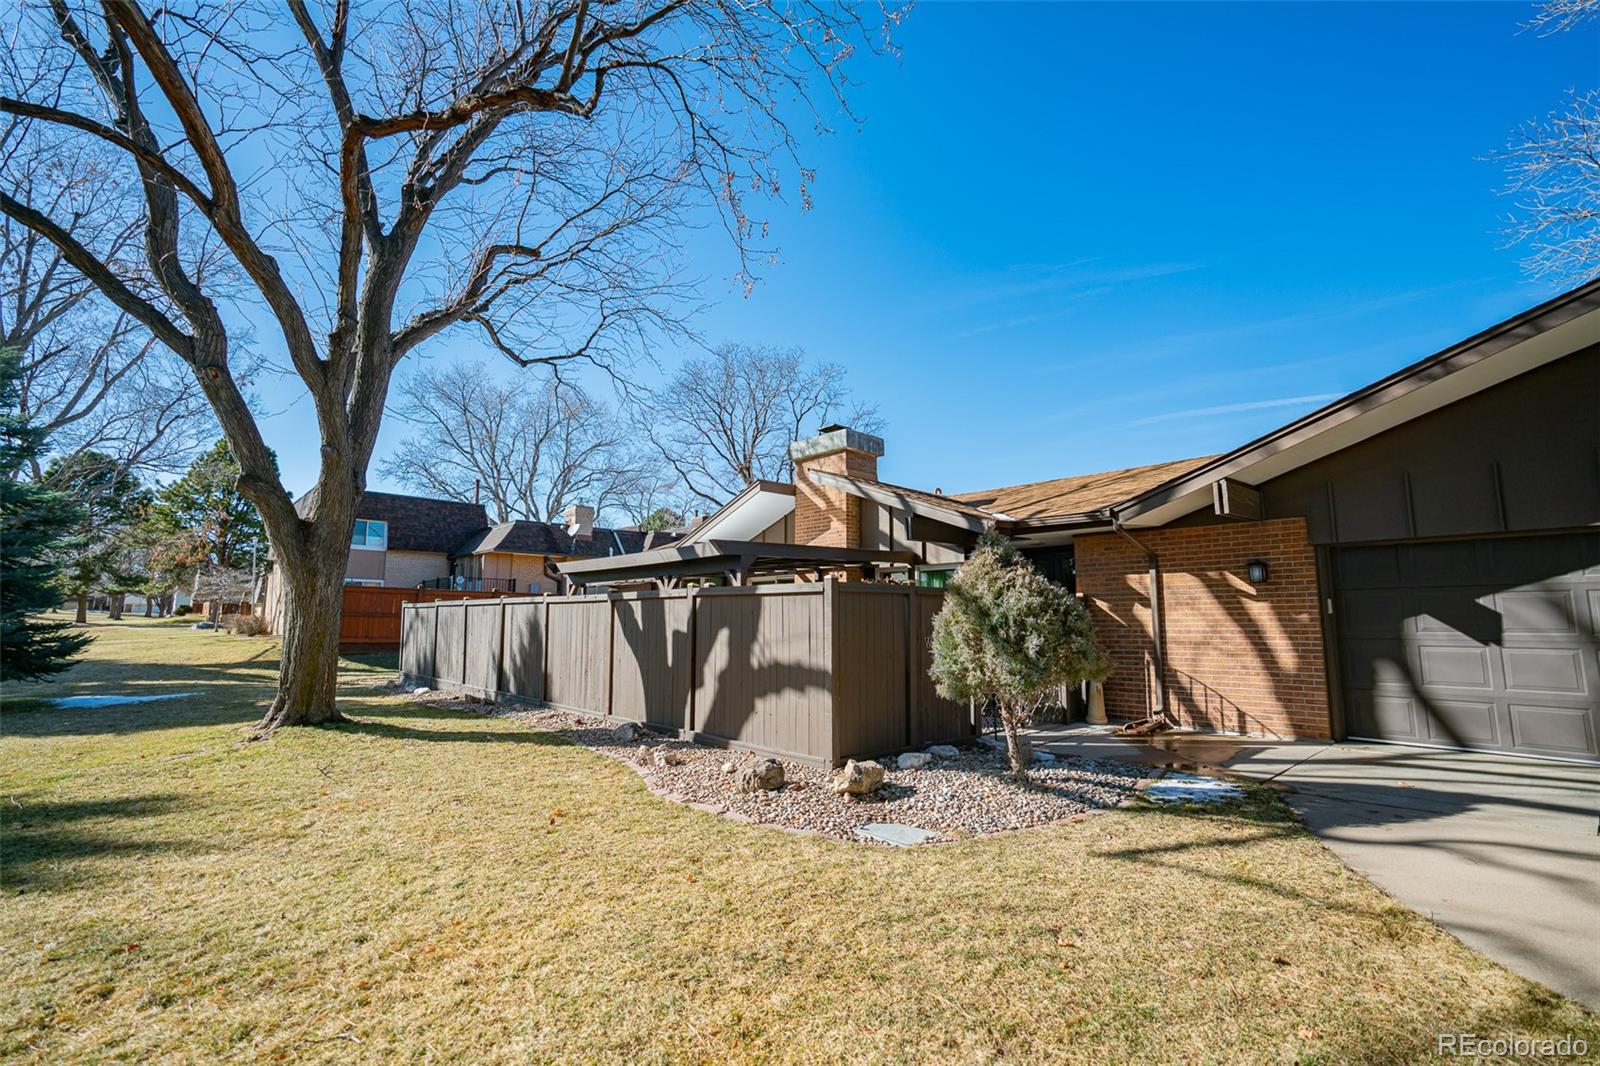 Report Image for 7202 W Maple Drive,Lakewood, Colorado